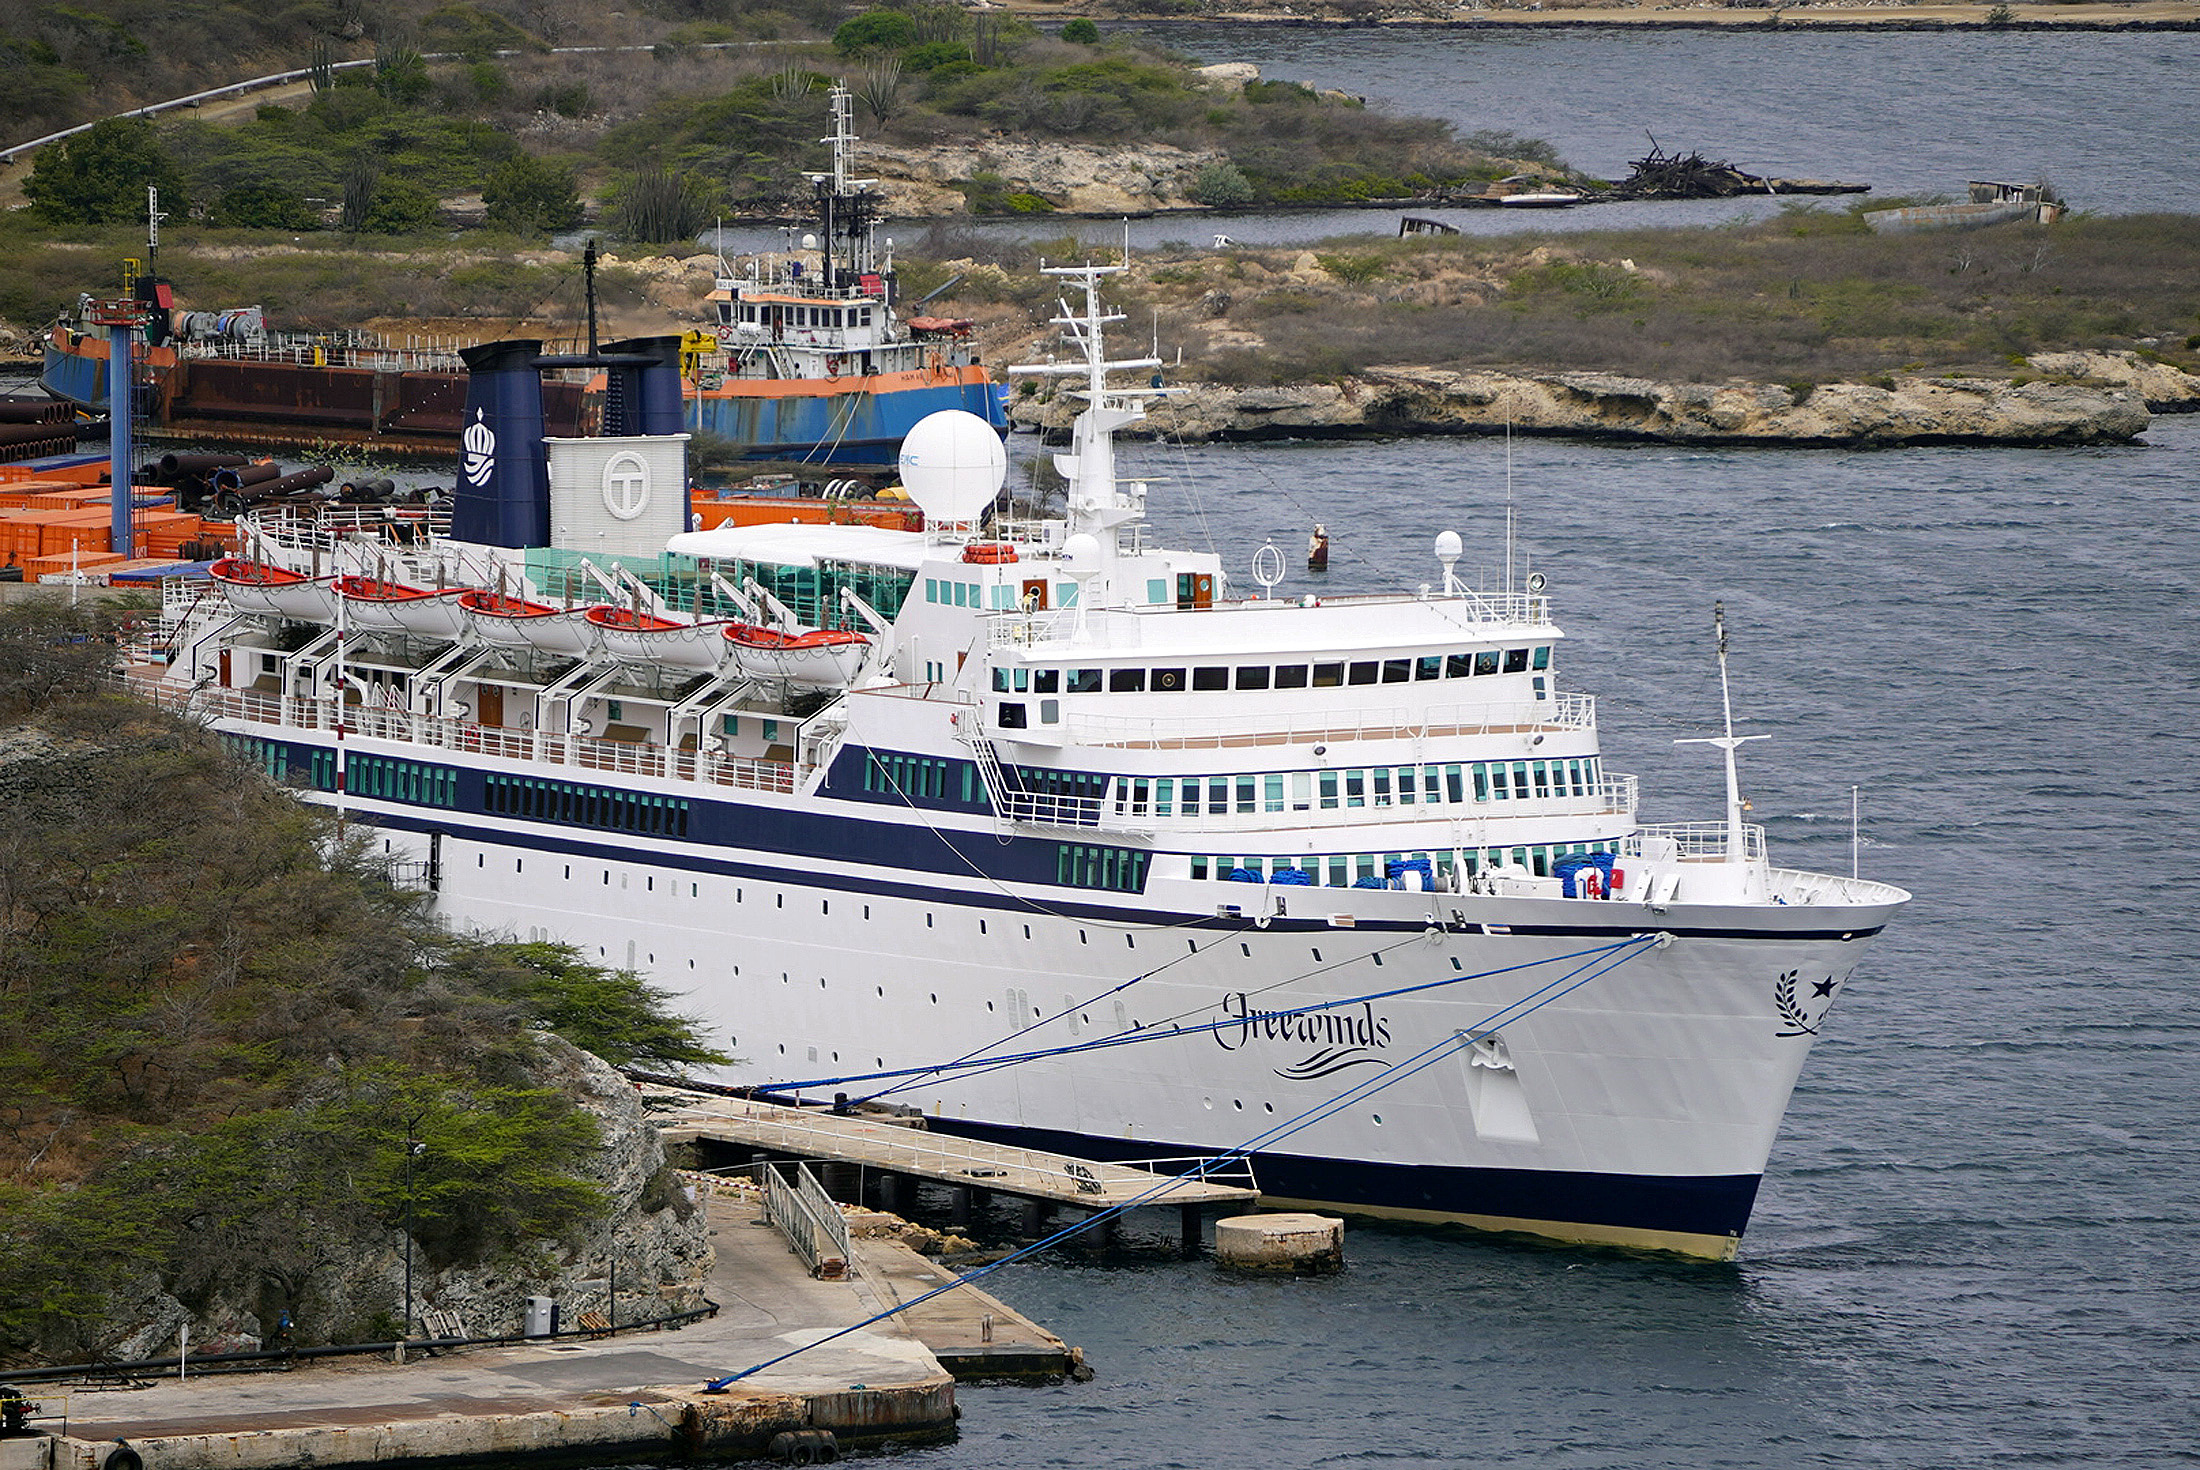 PHOTO: A 440-foot ship owned and operated by the Church of Scientology, SMV Freewinds, is docked under quarantine from a measles outbreak in port in Willemstad, Curacao, May 4, 2019.